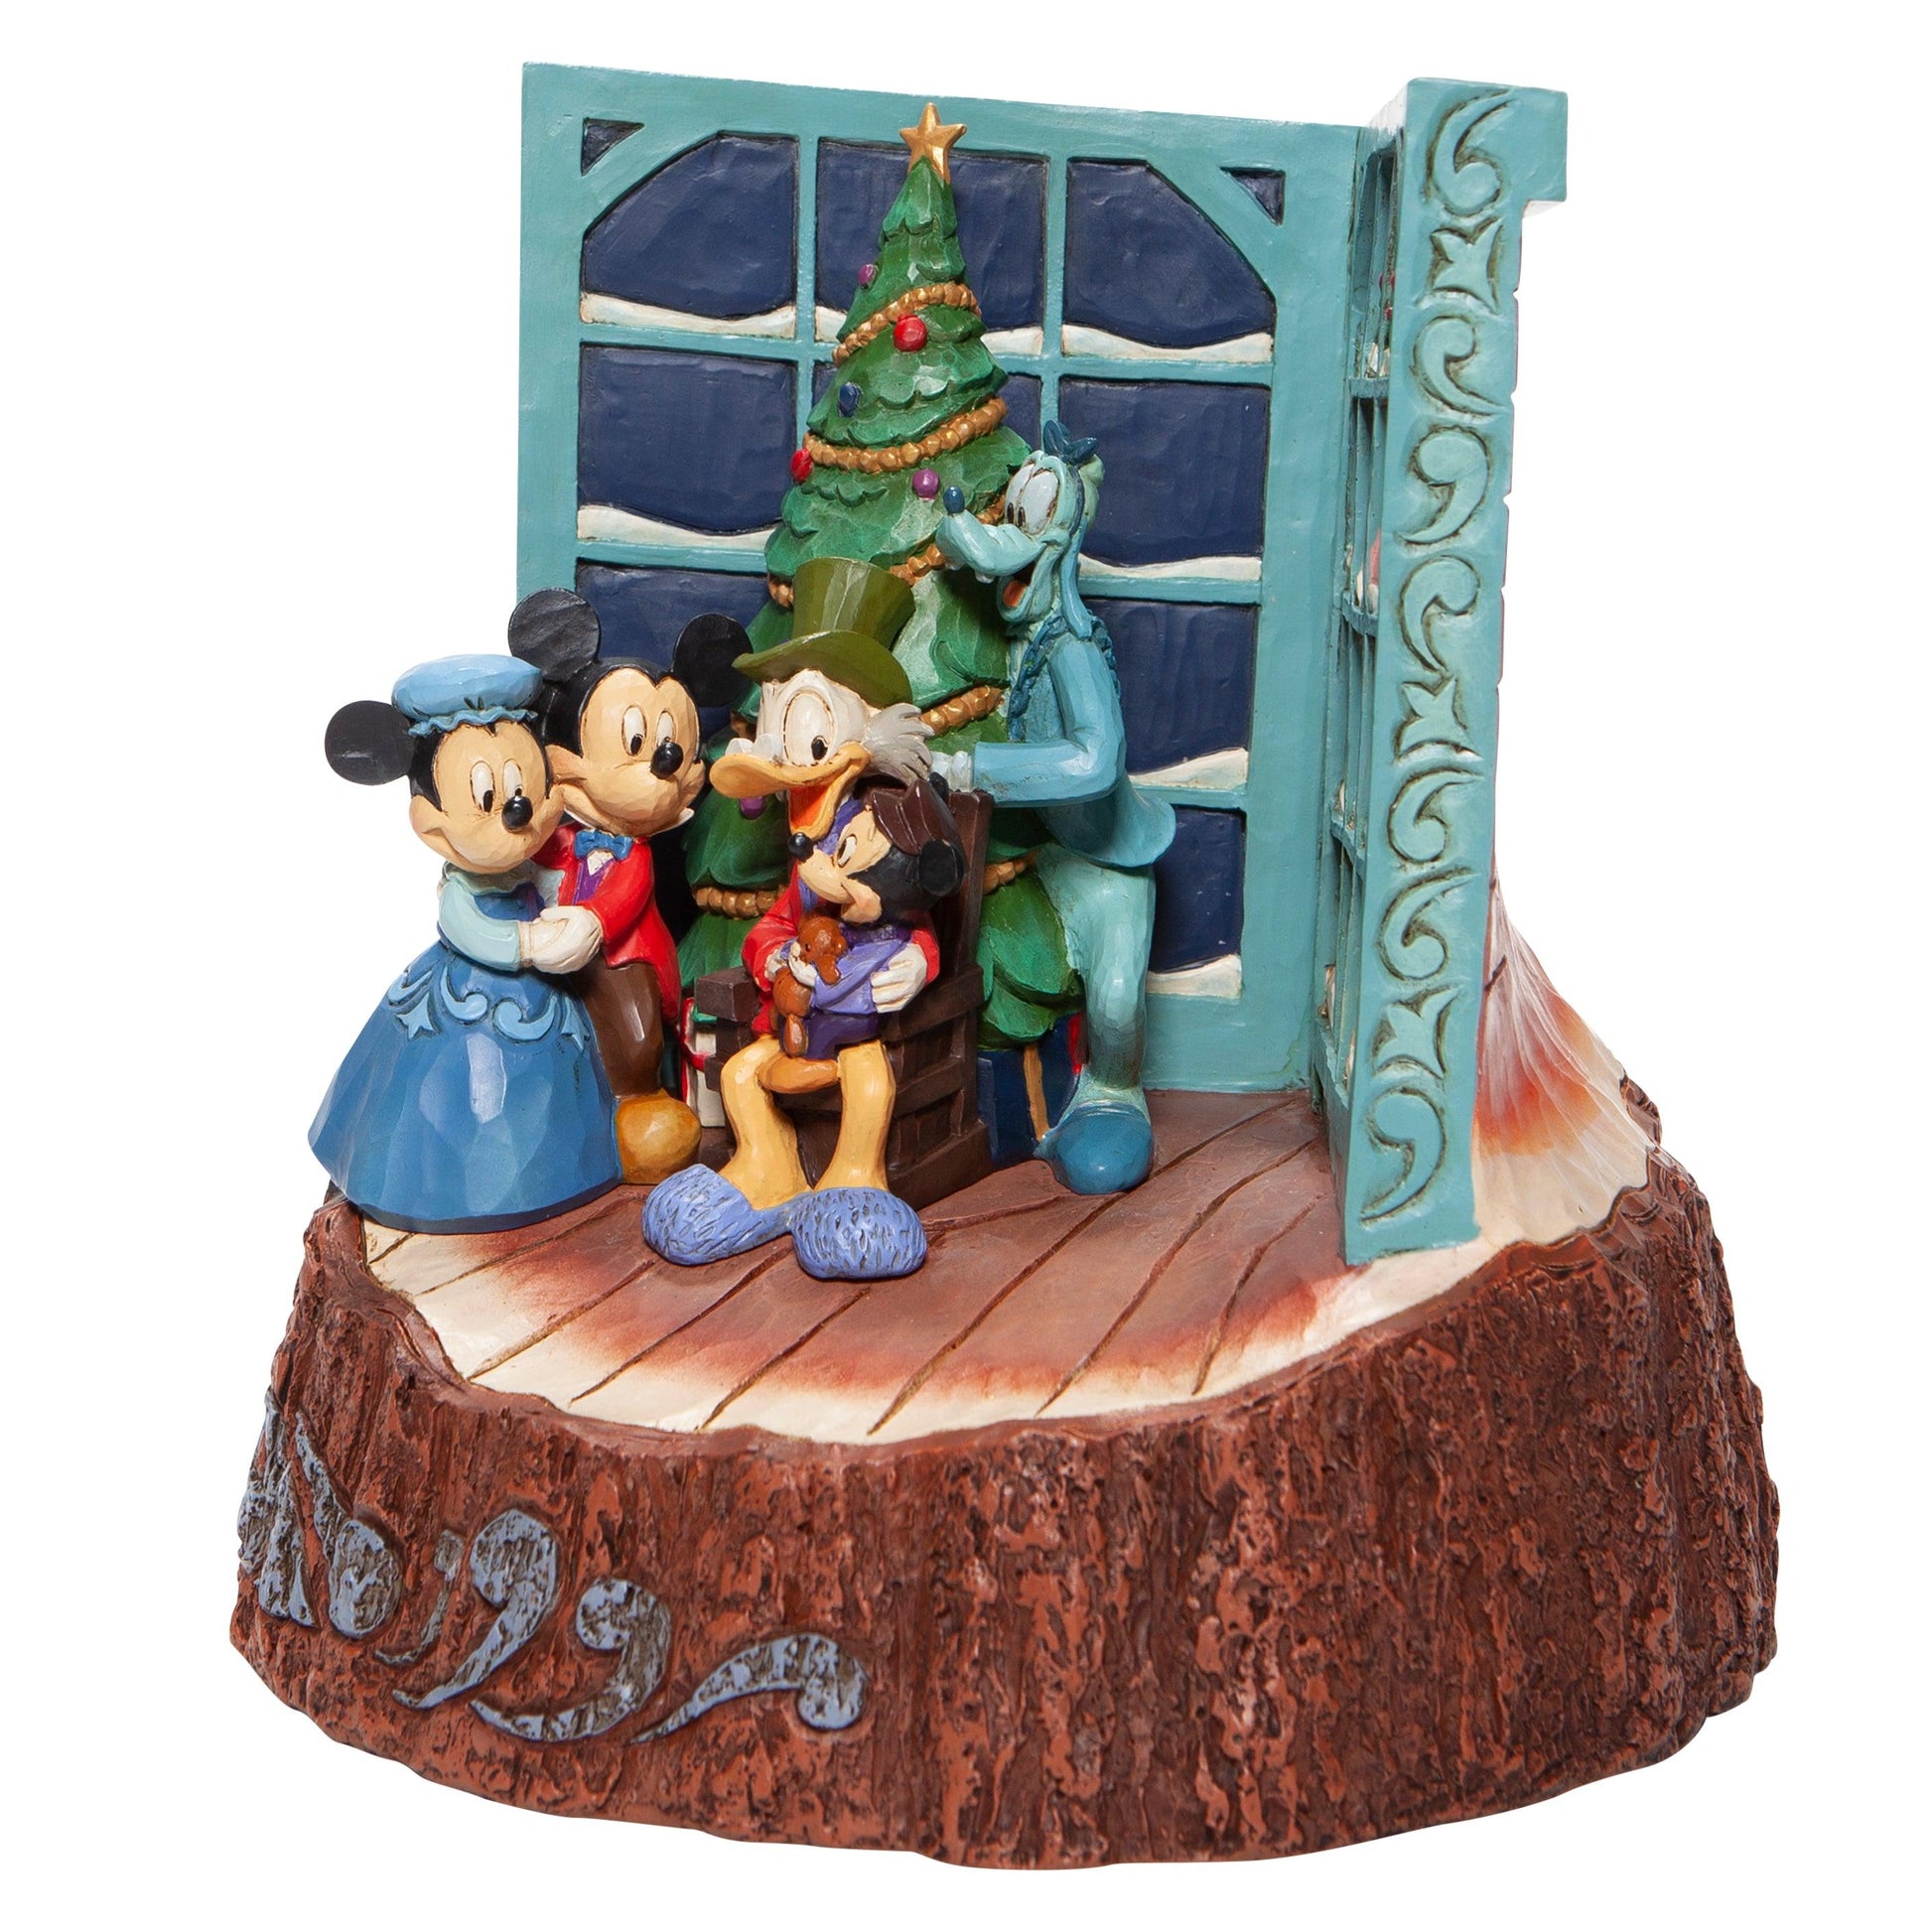 Carved by Heart Mickey Mouse Christmas Carol Figurine (Disney Traditions by Jim Shore) - Gallery Gifts Online 